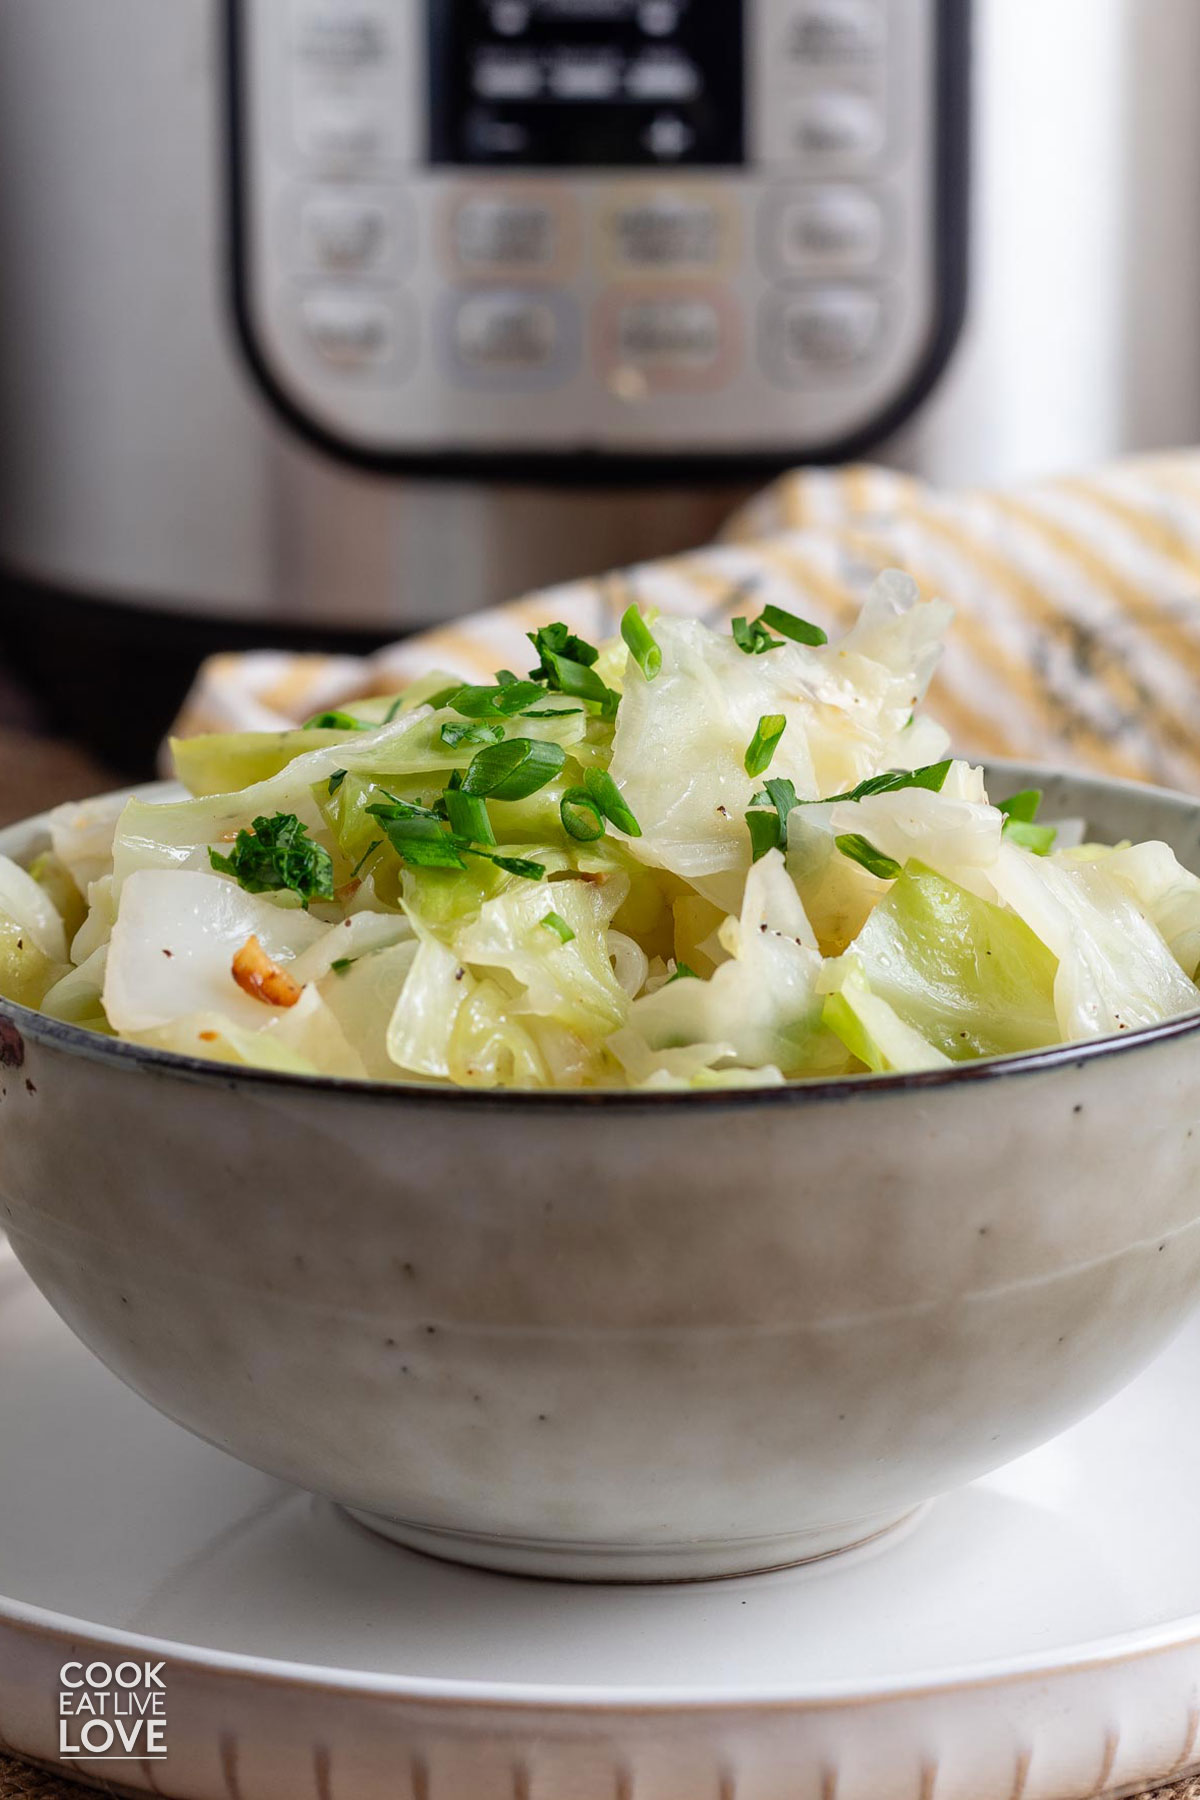 Bowl of cooked cabbage in front of the Instant pot.